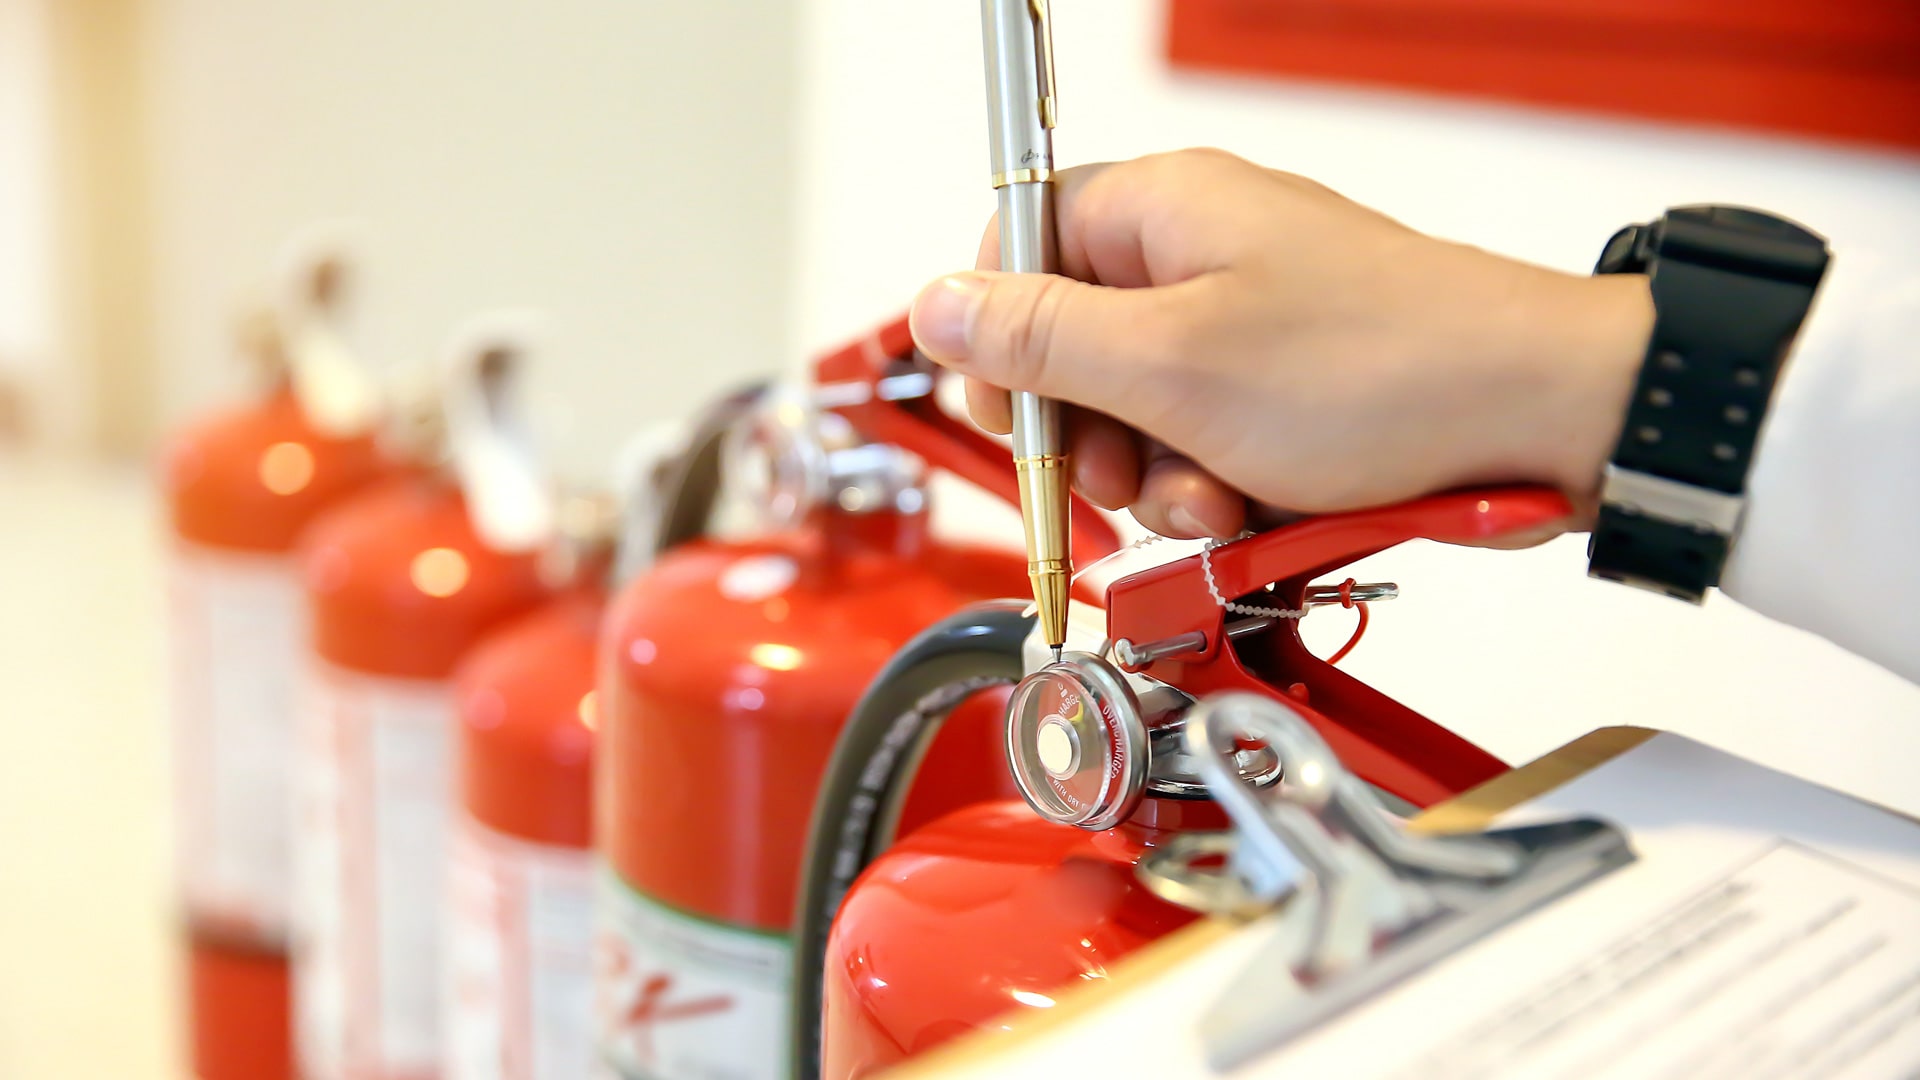 Fire Extinguisher Sales, Service, Certification - COMMERCIAL | APARTMENT BLDG | RESIDENTIAL | MARINE - PAL FIRE PROTECTION